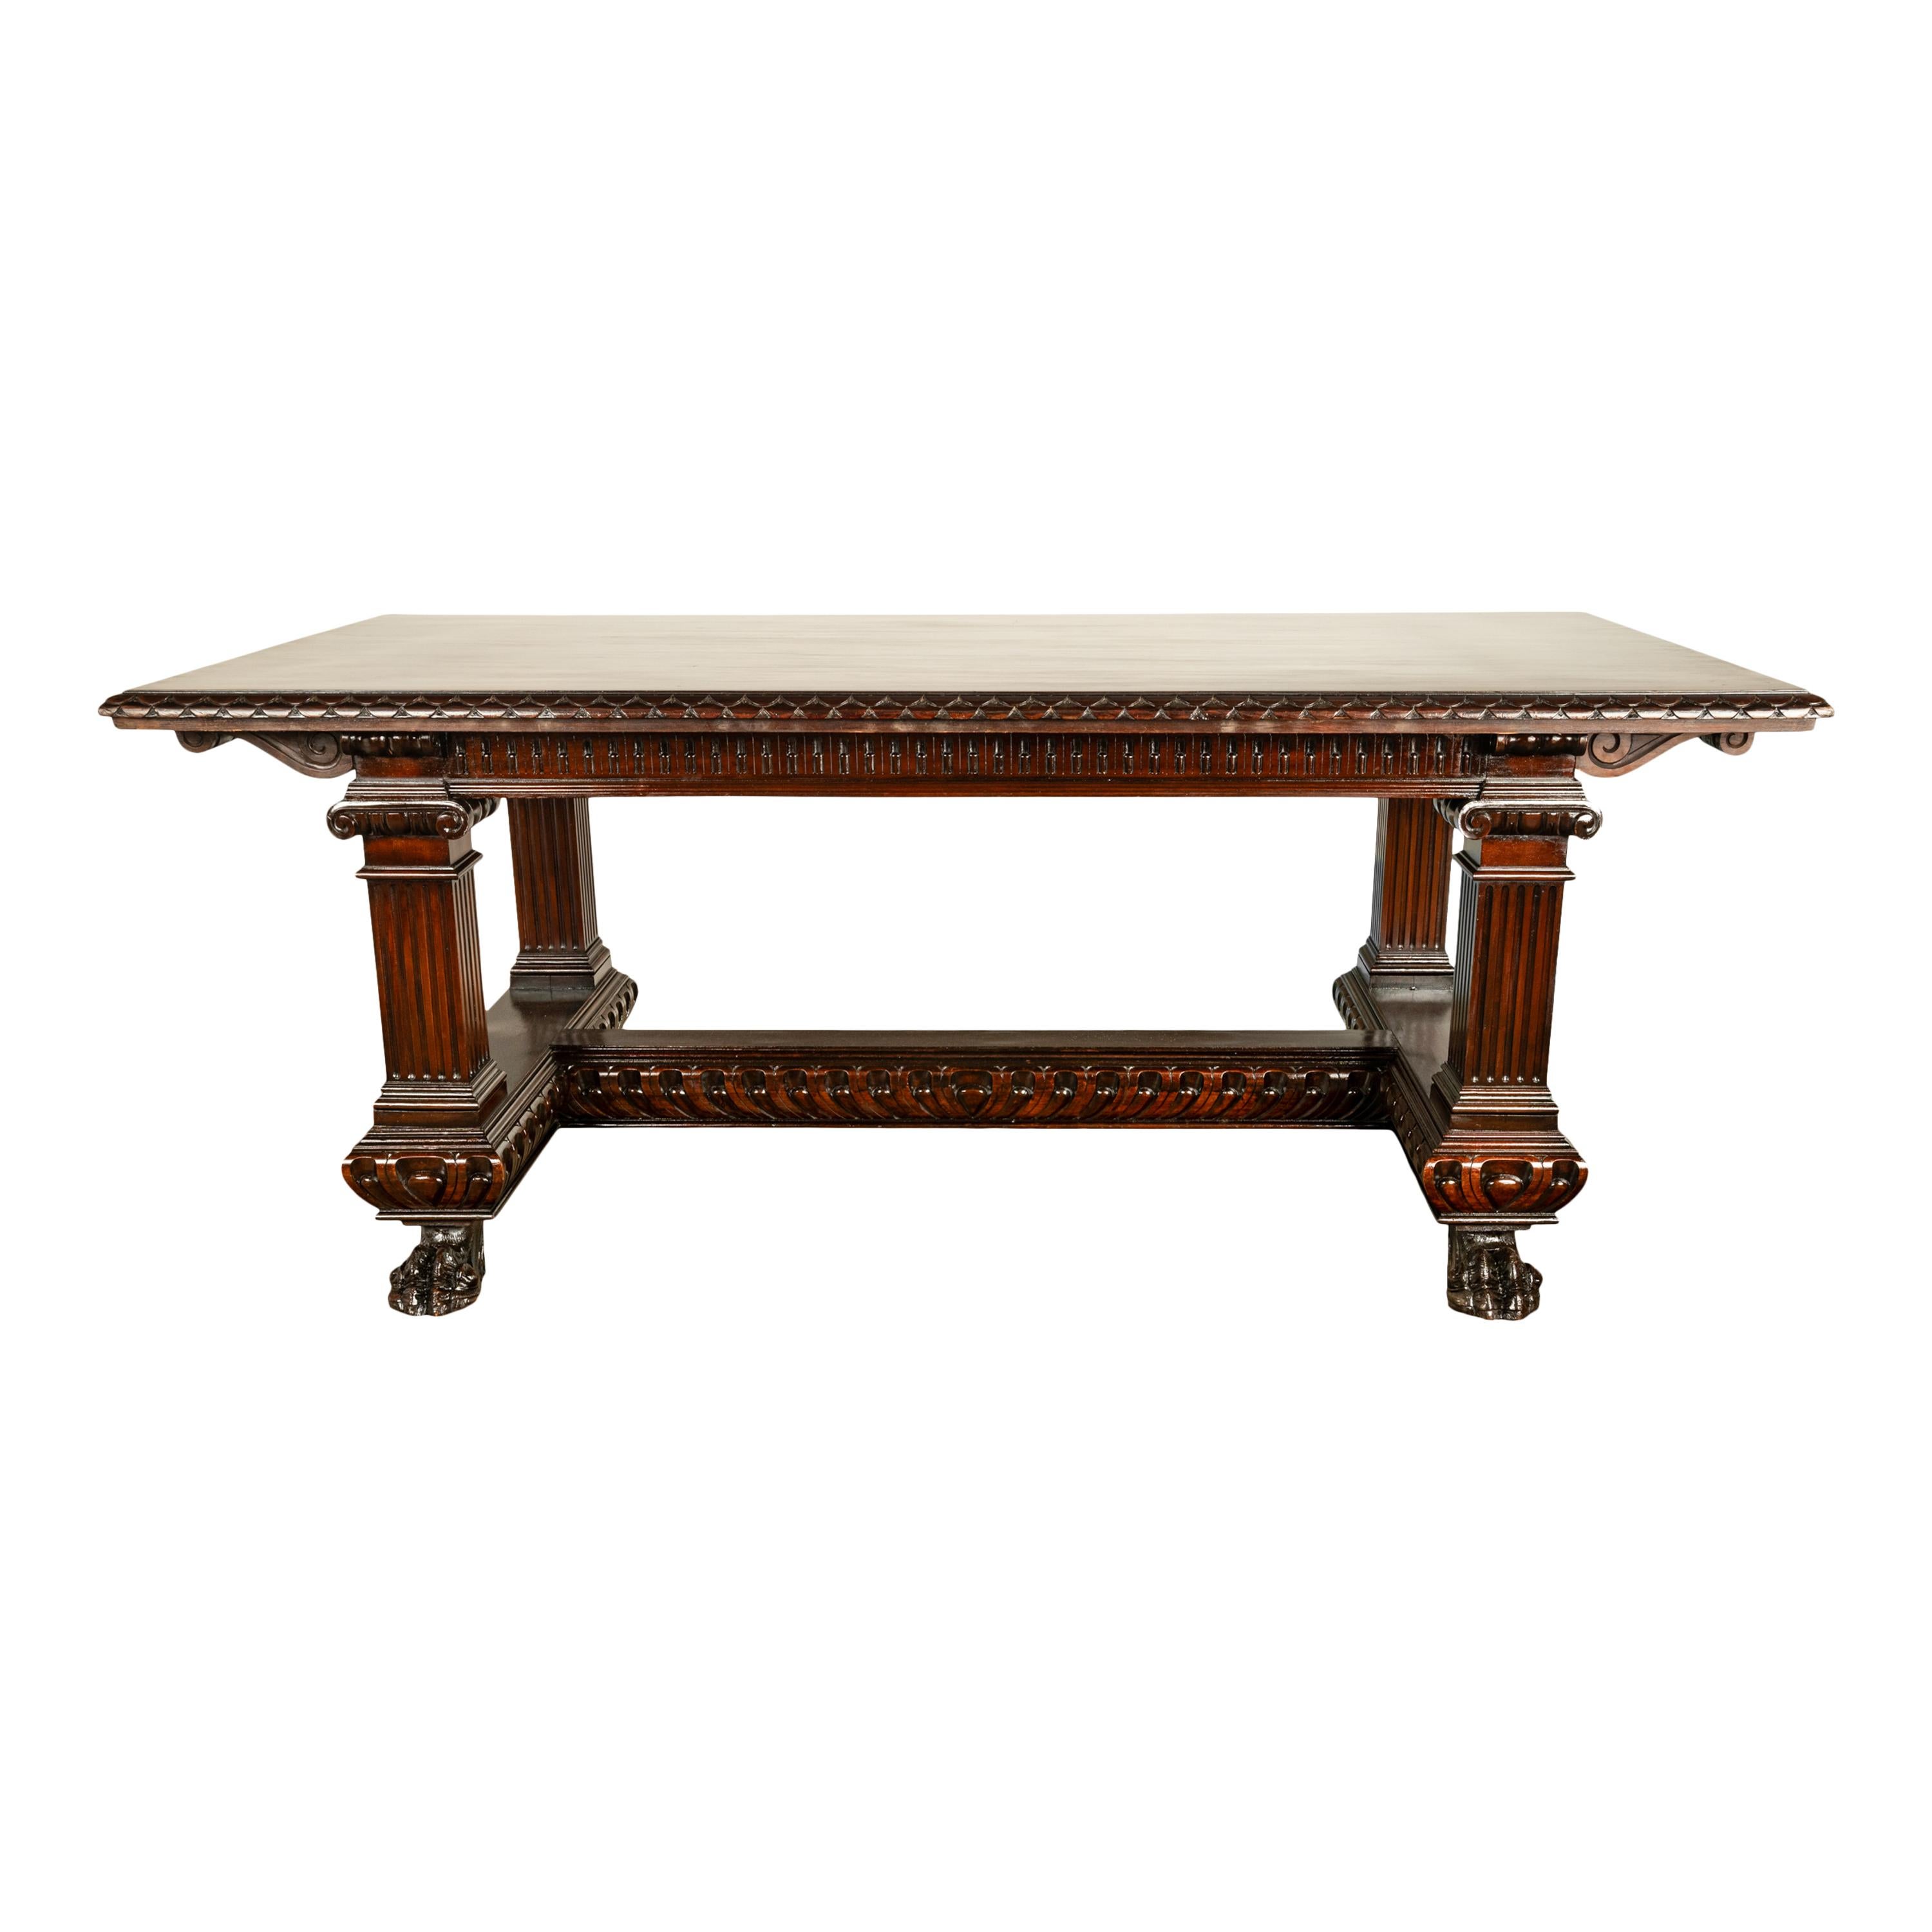 Antique Italian Carved Renaissance Revival Walnut Library Dining Table 1880 For Sale 8